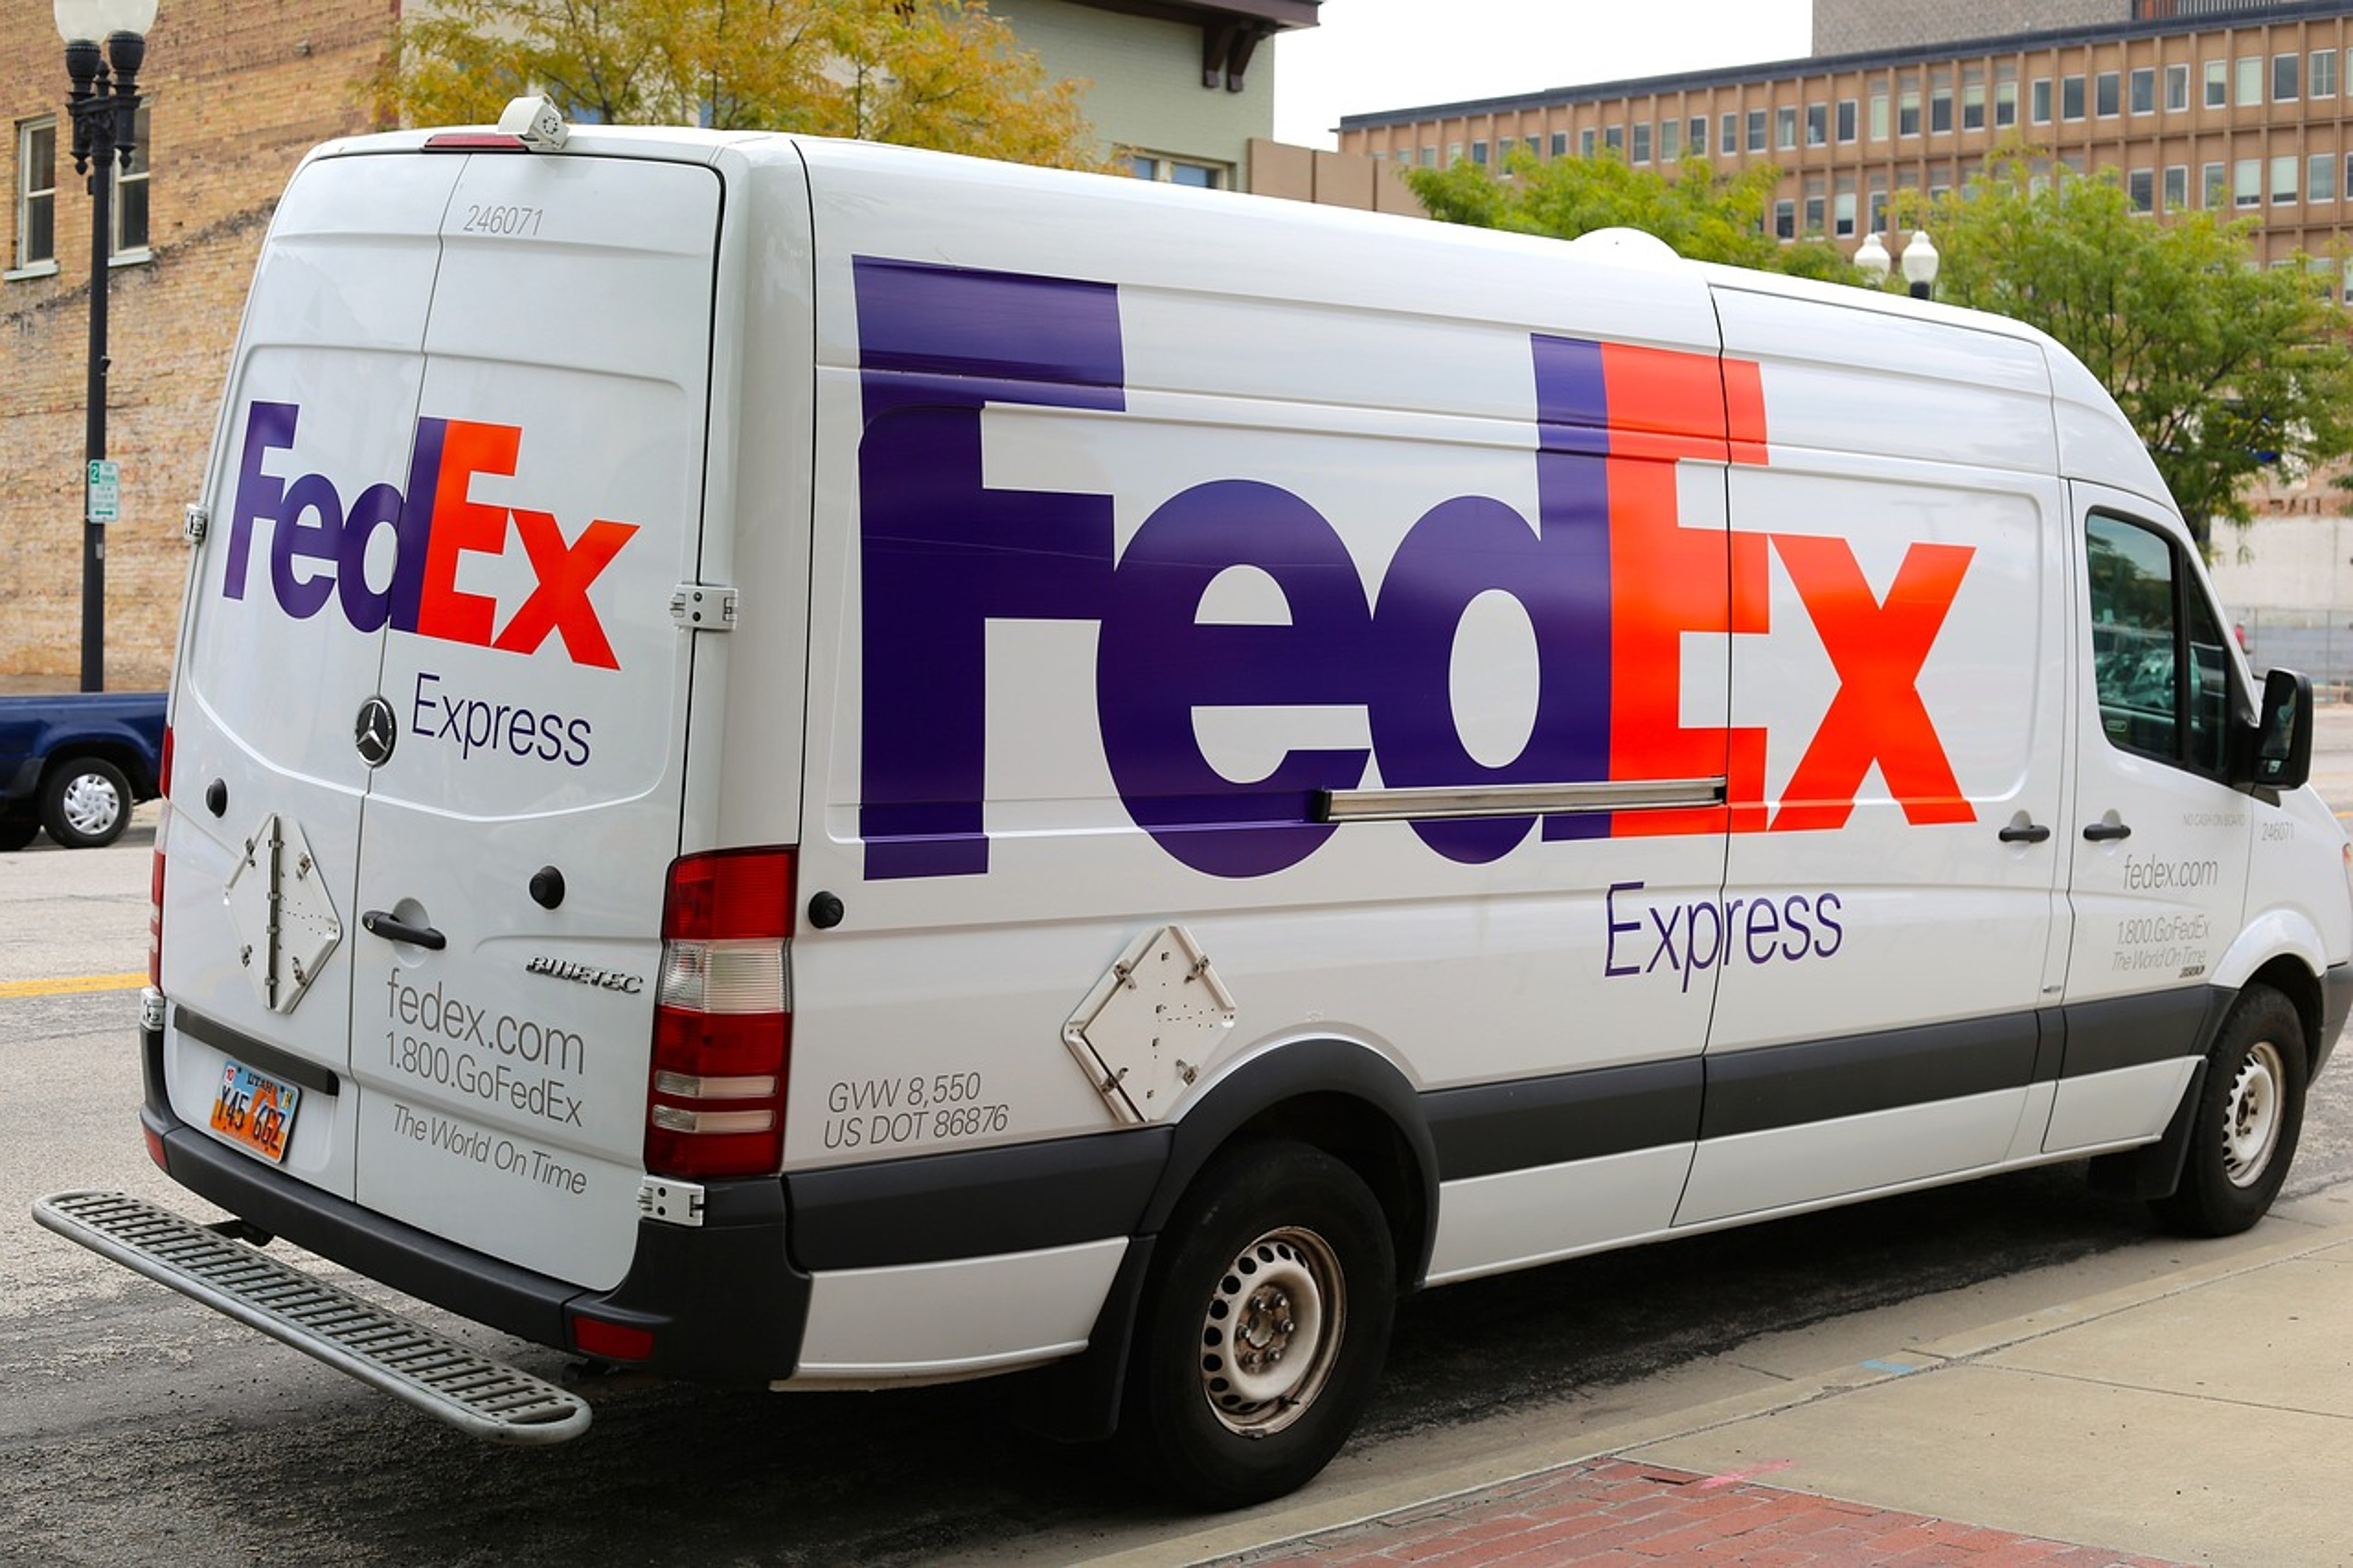 FedEx Set To Report Earnings Wednesday, Options Market Implies Over 5% Move